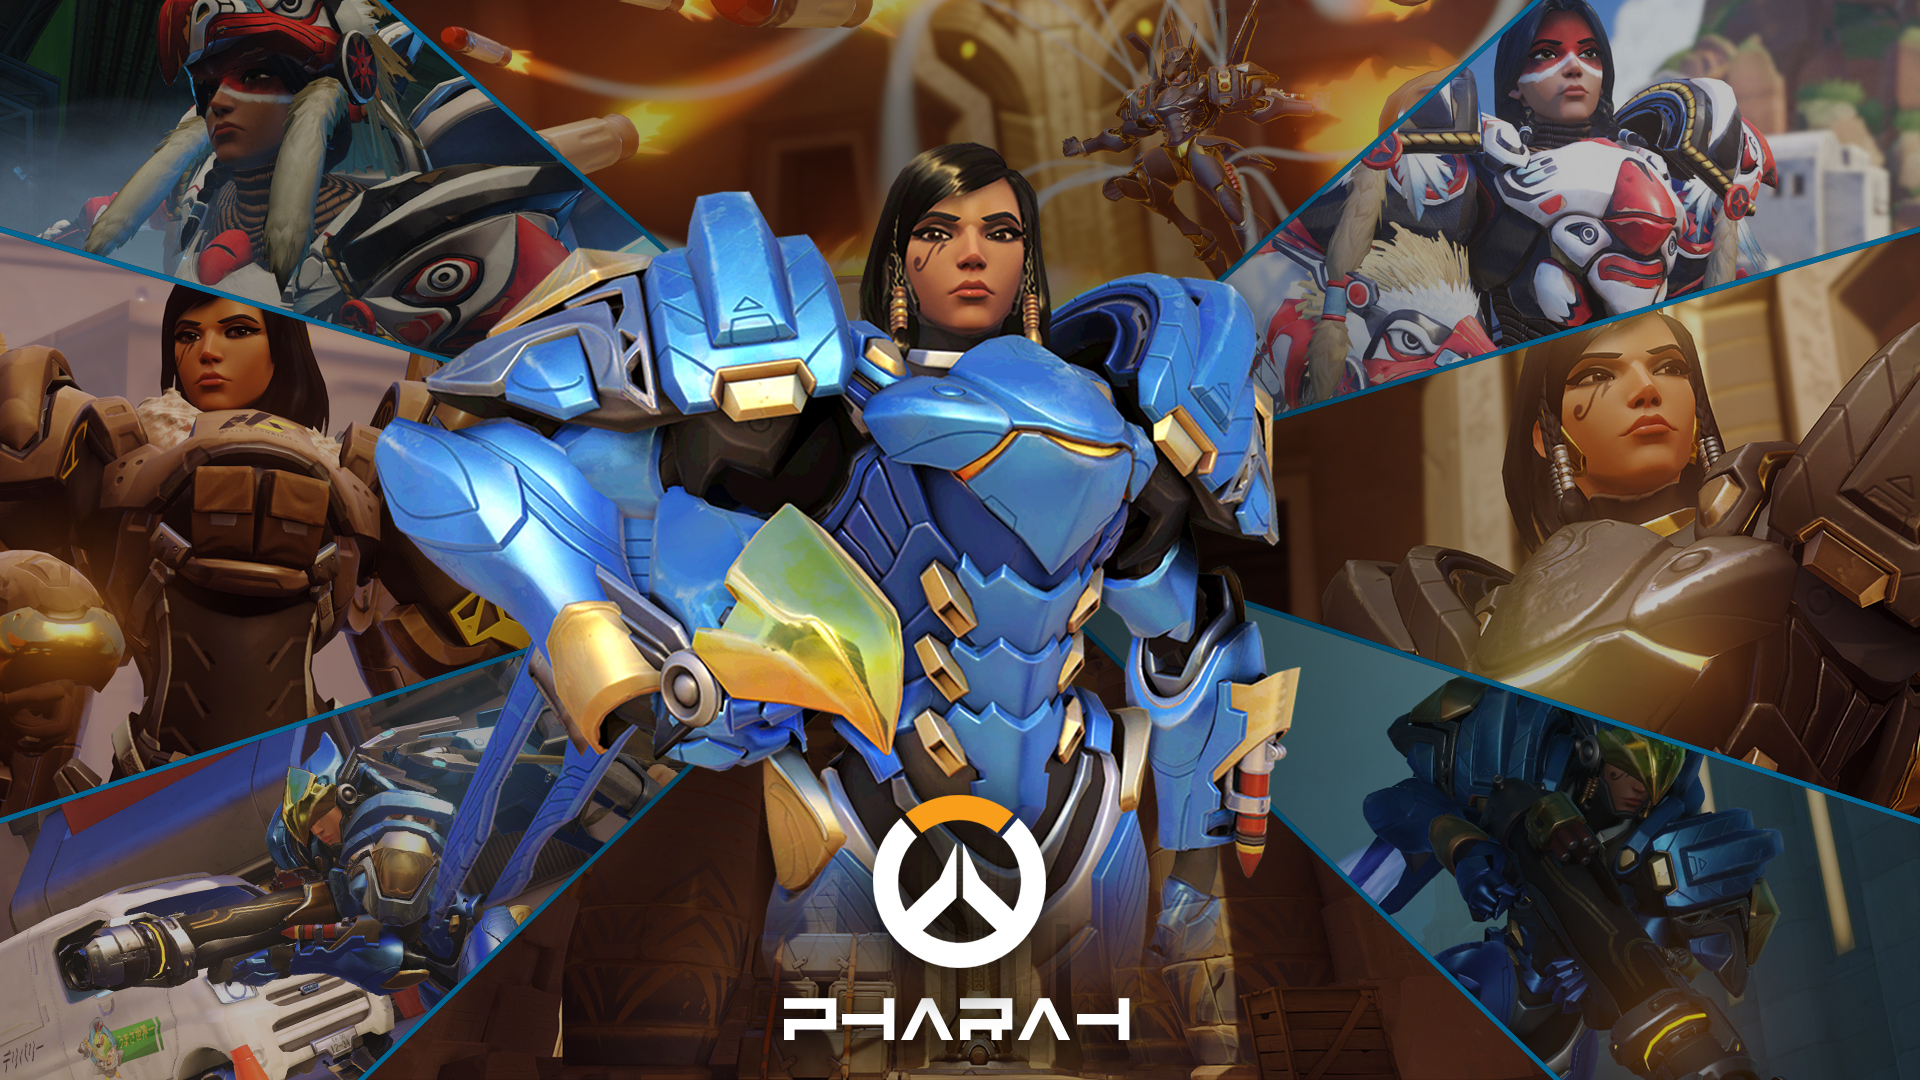 1920x1080 100+ Pharah (Overwatch) HD Wallpapers and Backgrounds